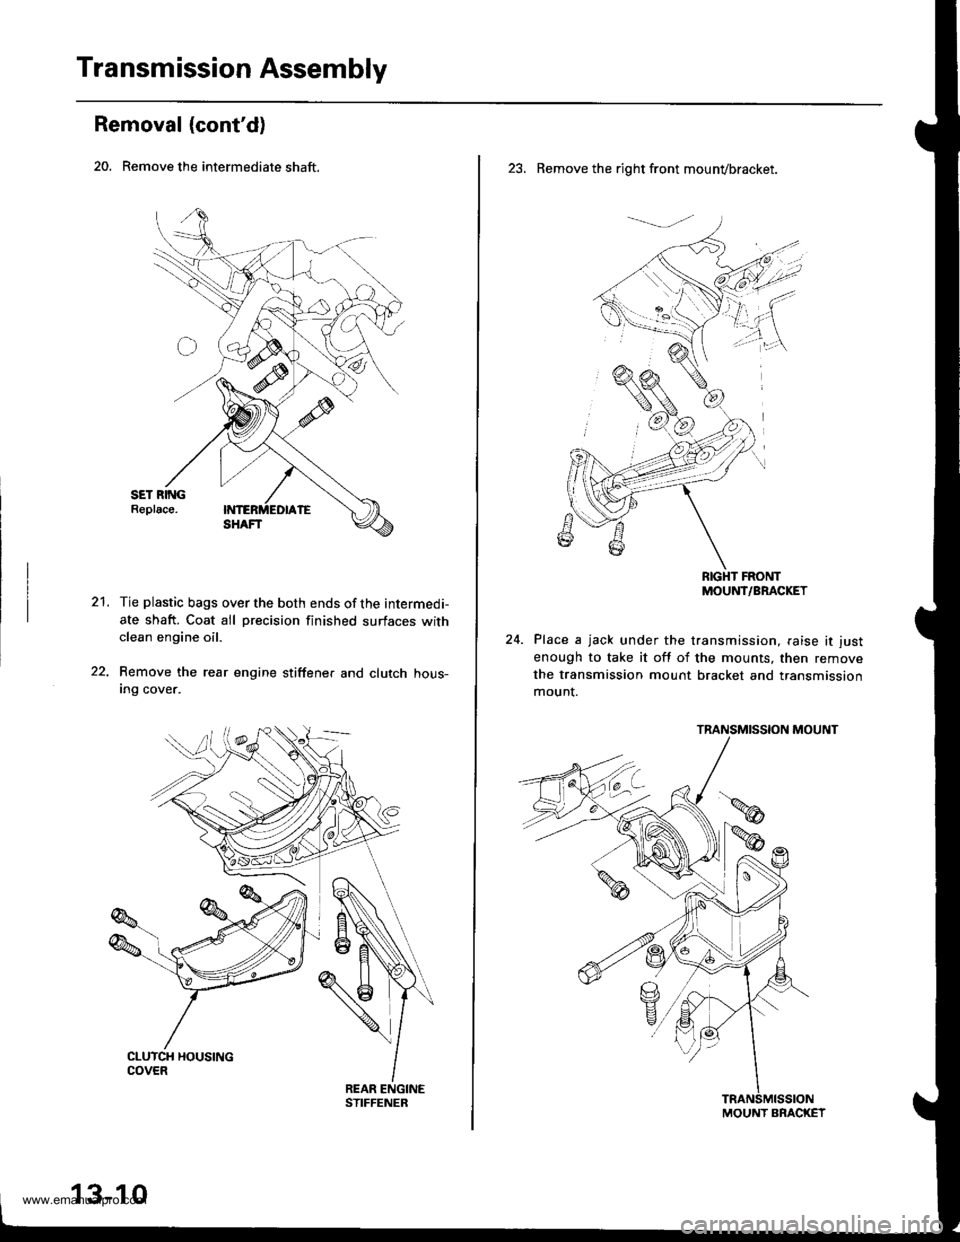 HONDA CR-V 1997 RD1-RD3 / 1.G Service Manual 
Transmission Assembly
Removal (contd)
20. Remove the intermediate shaft.
21.Tie plastic bags over the both ends of the intermedi-
ate shaft. Coat all precision finished surfaces withclean engine oil